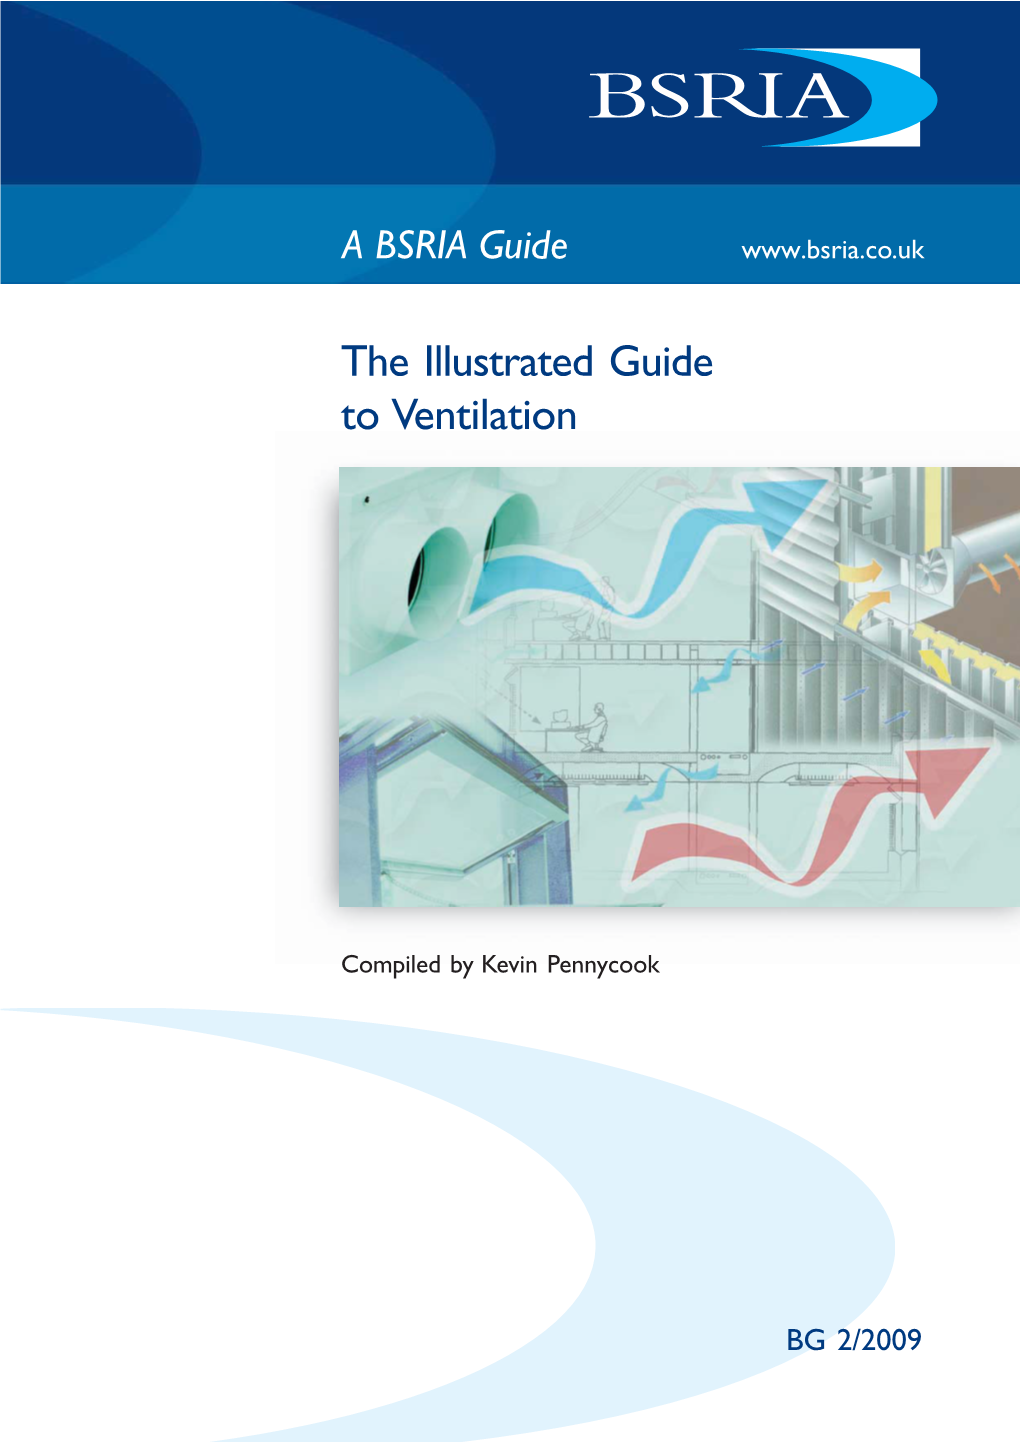 The Illustrated Guide to Ventilation